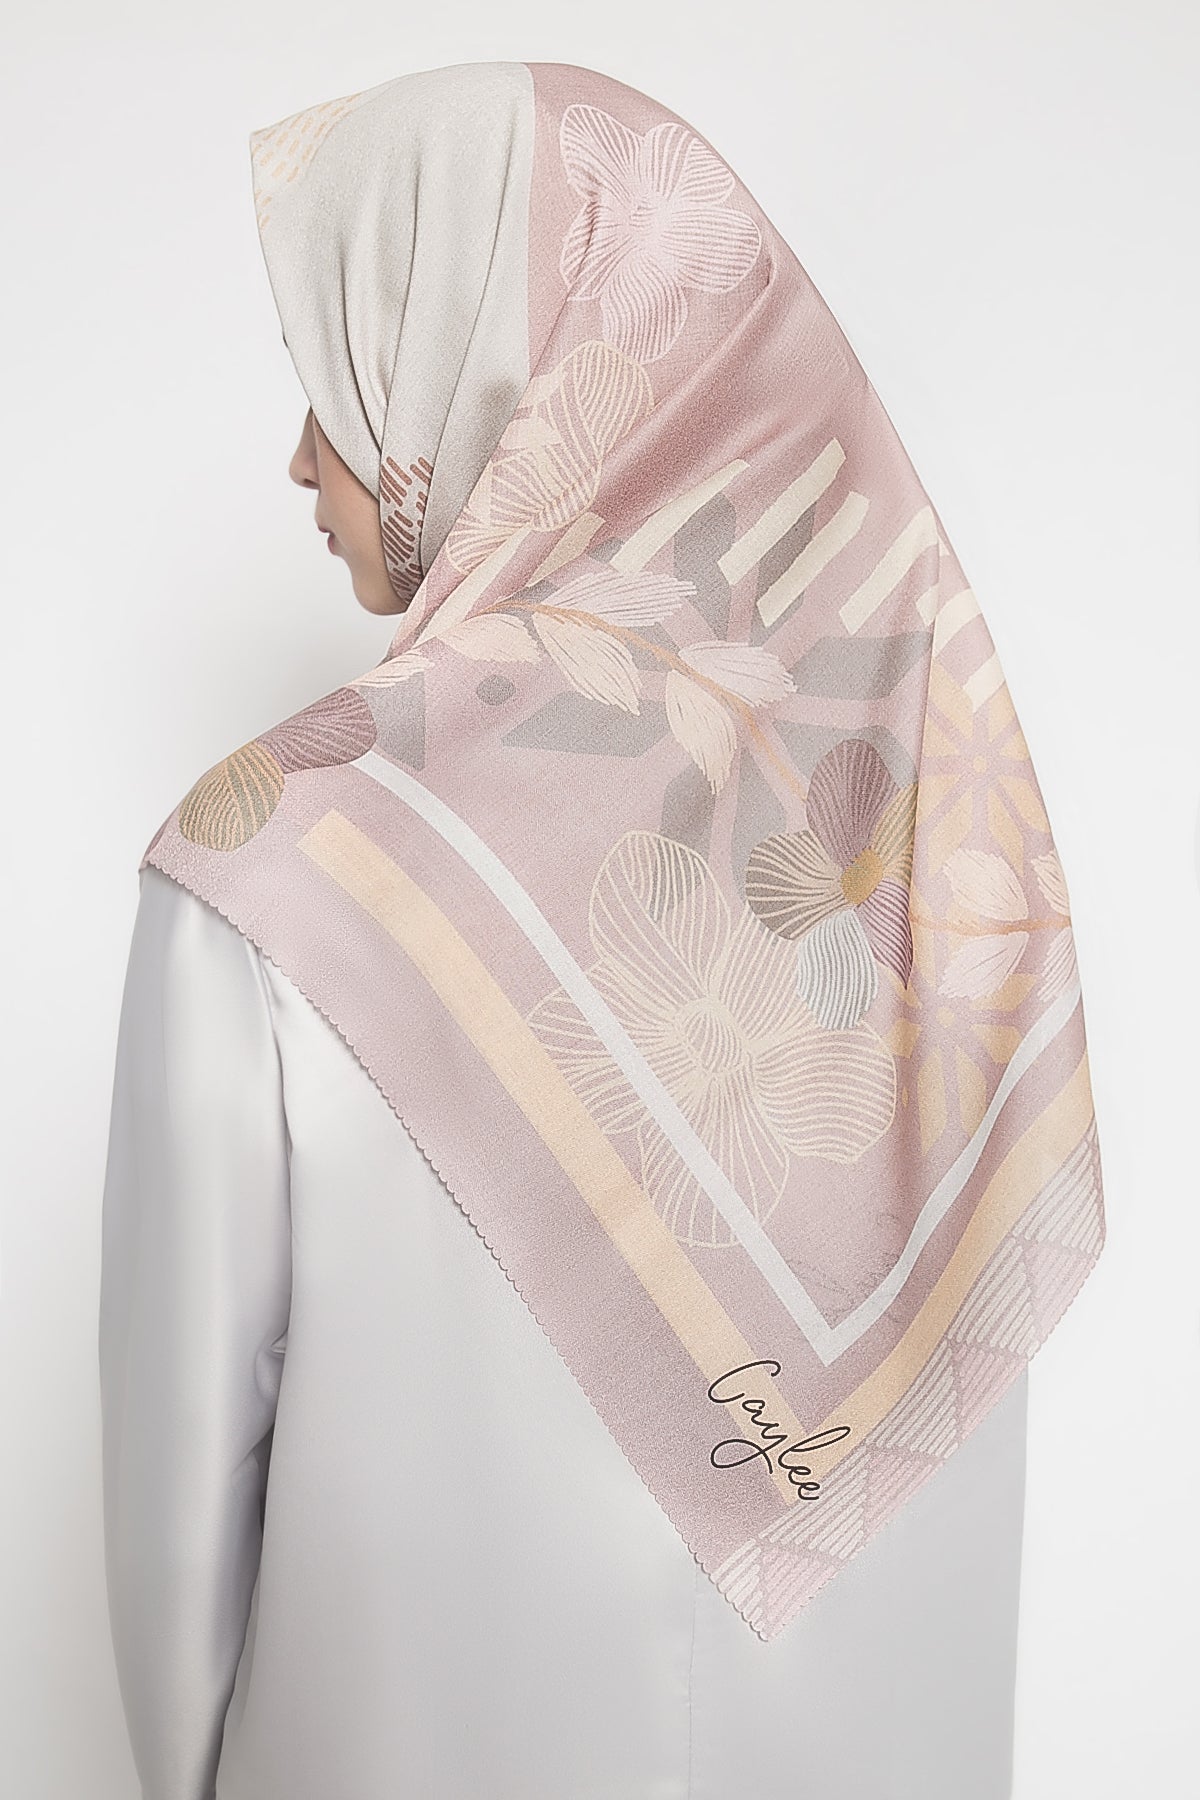 Ranah Selapah Scarf in Dusty Pink